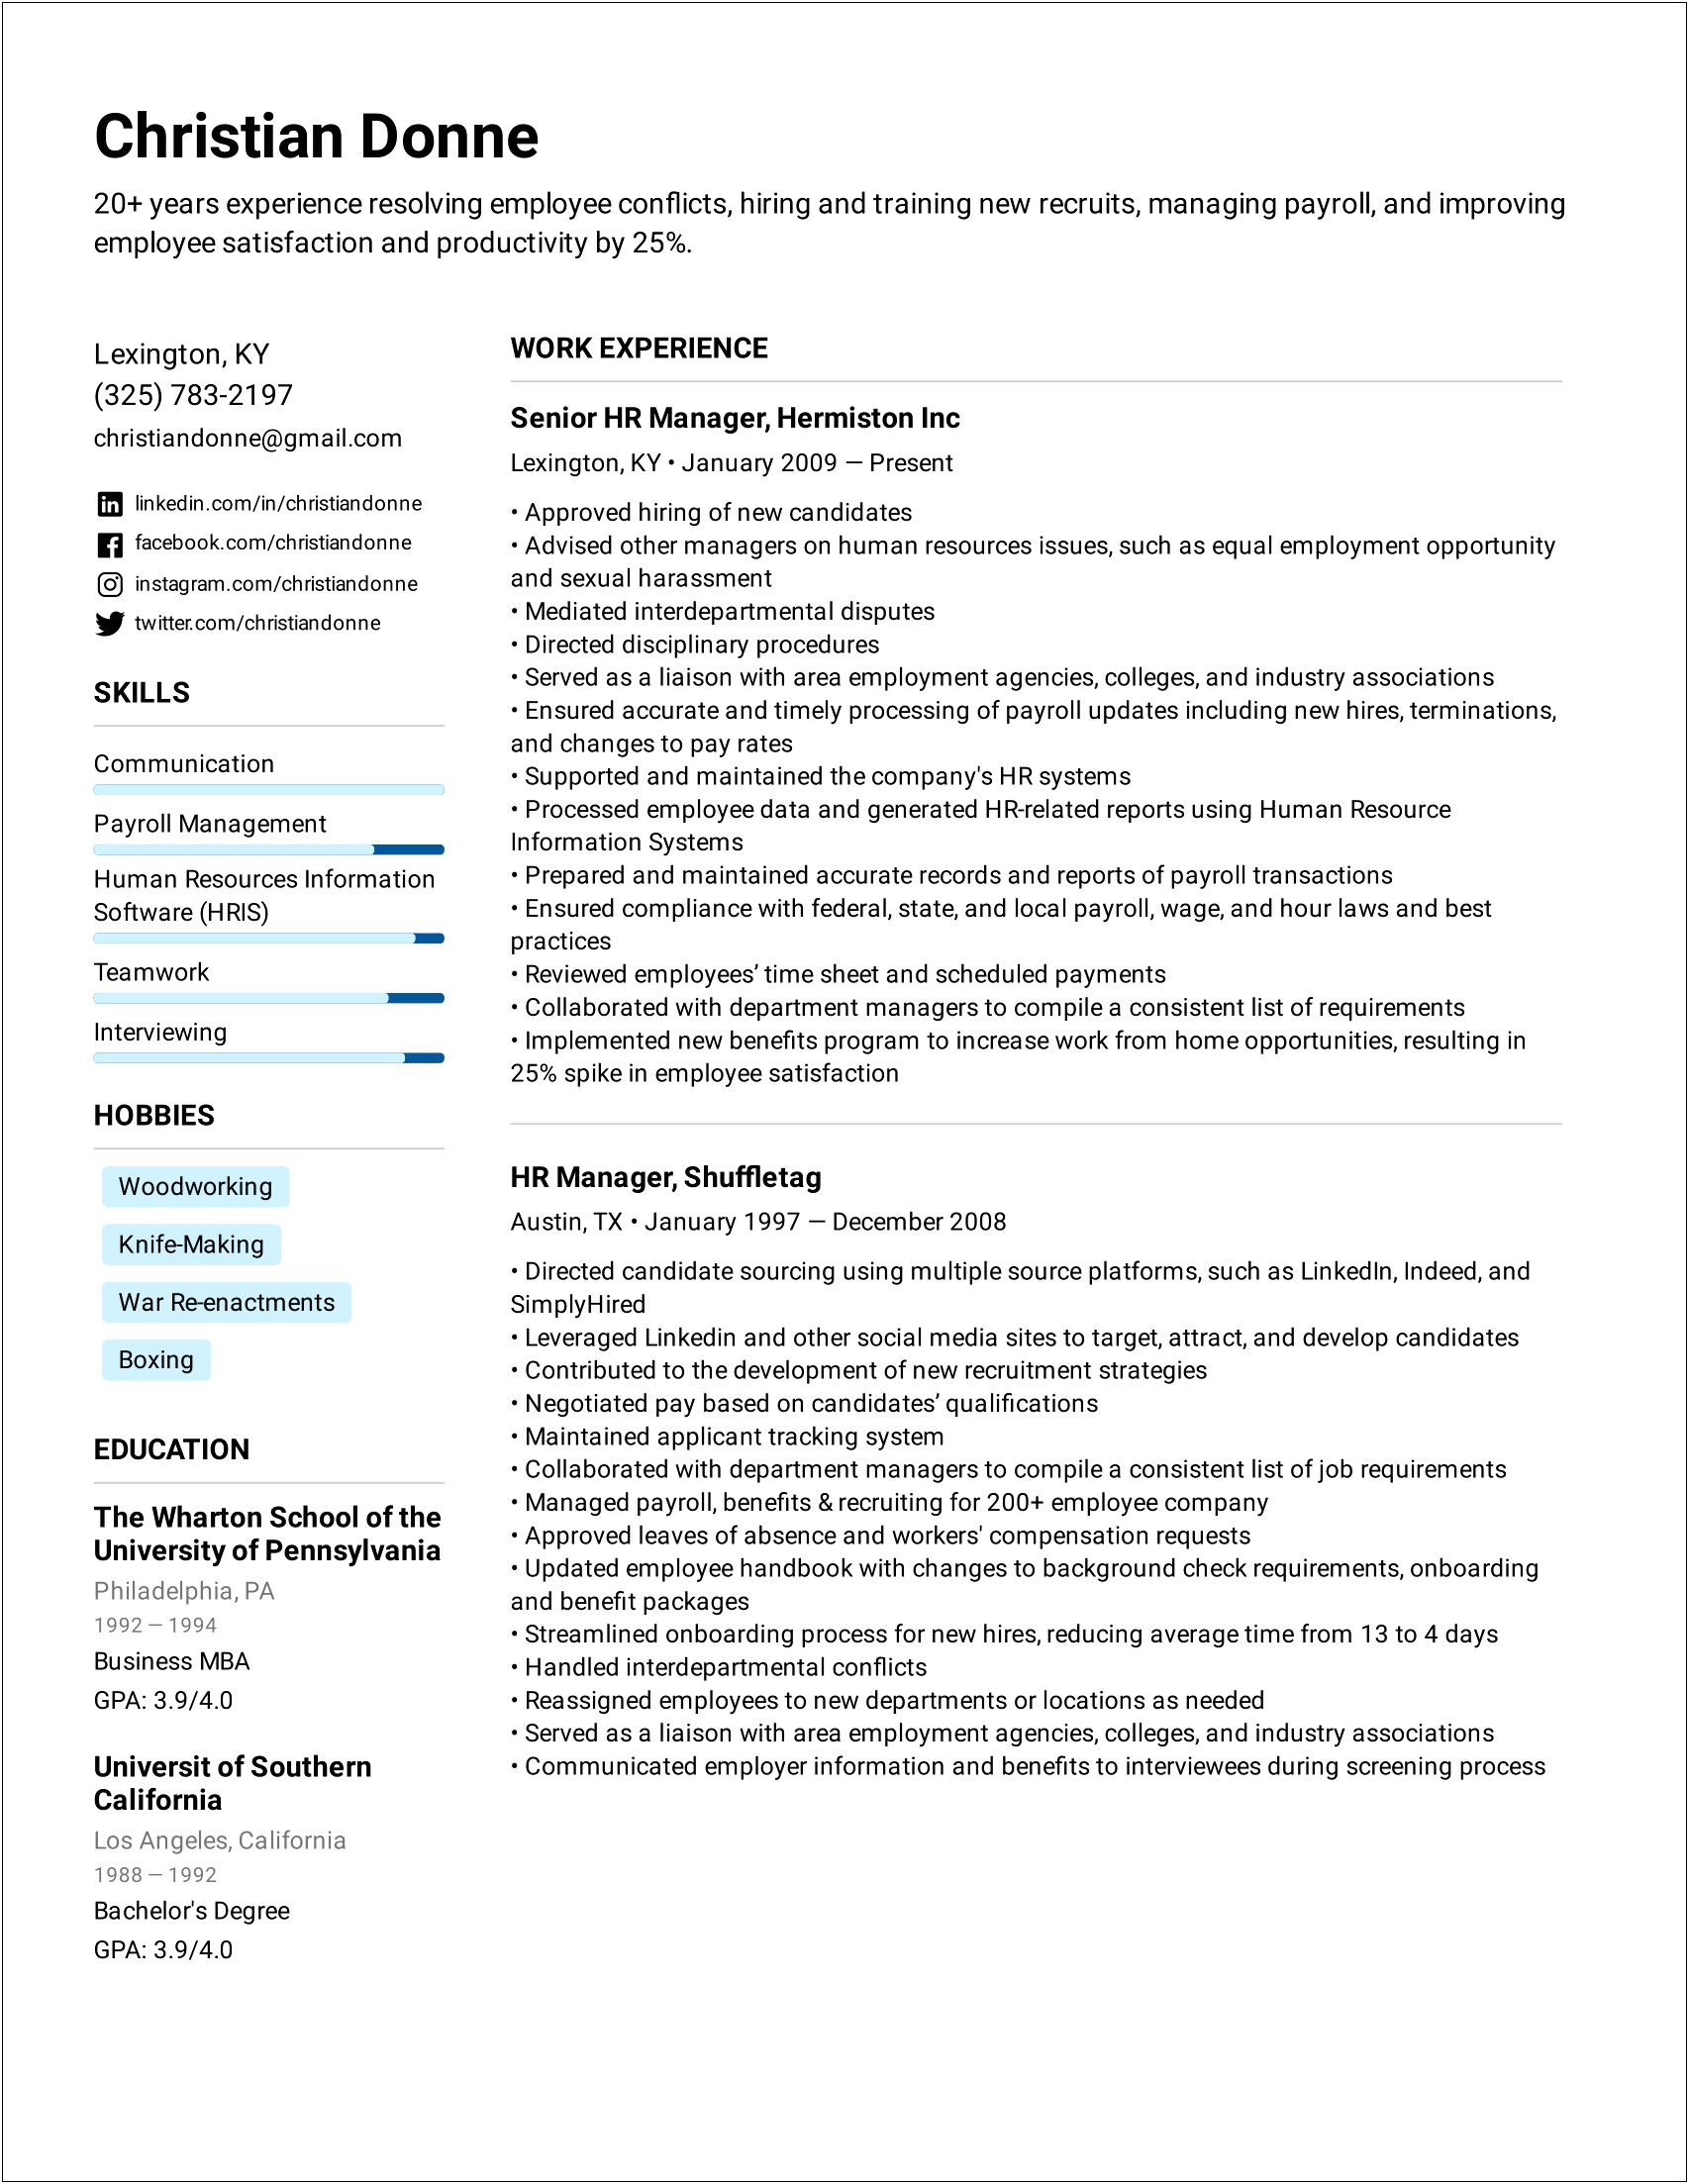 Communication Skills And Abilities On Resume